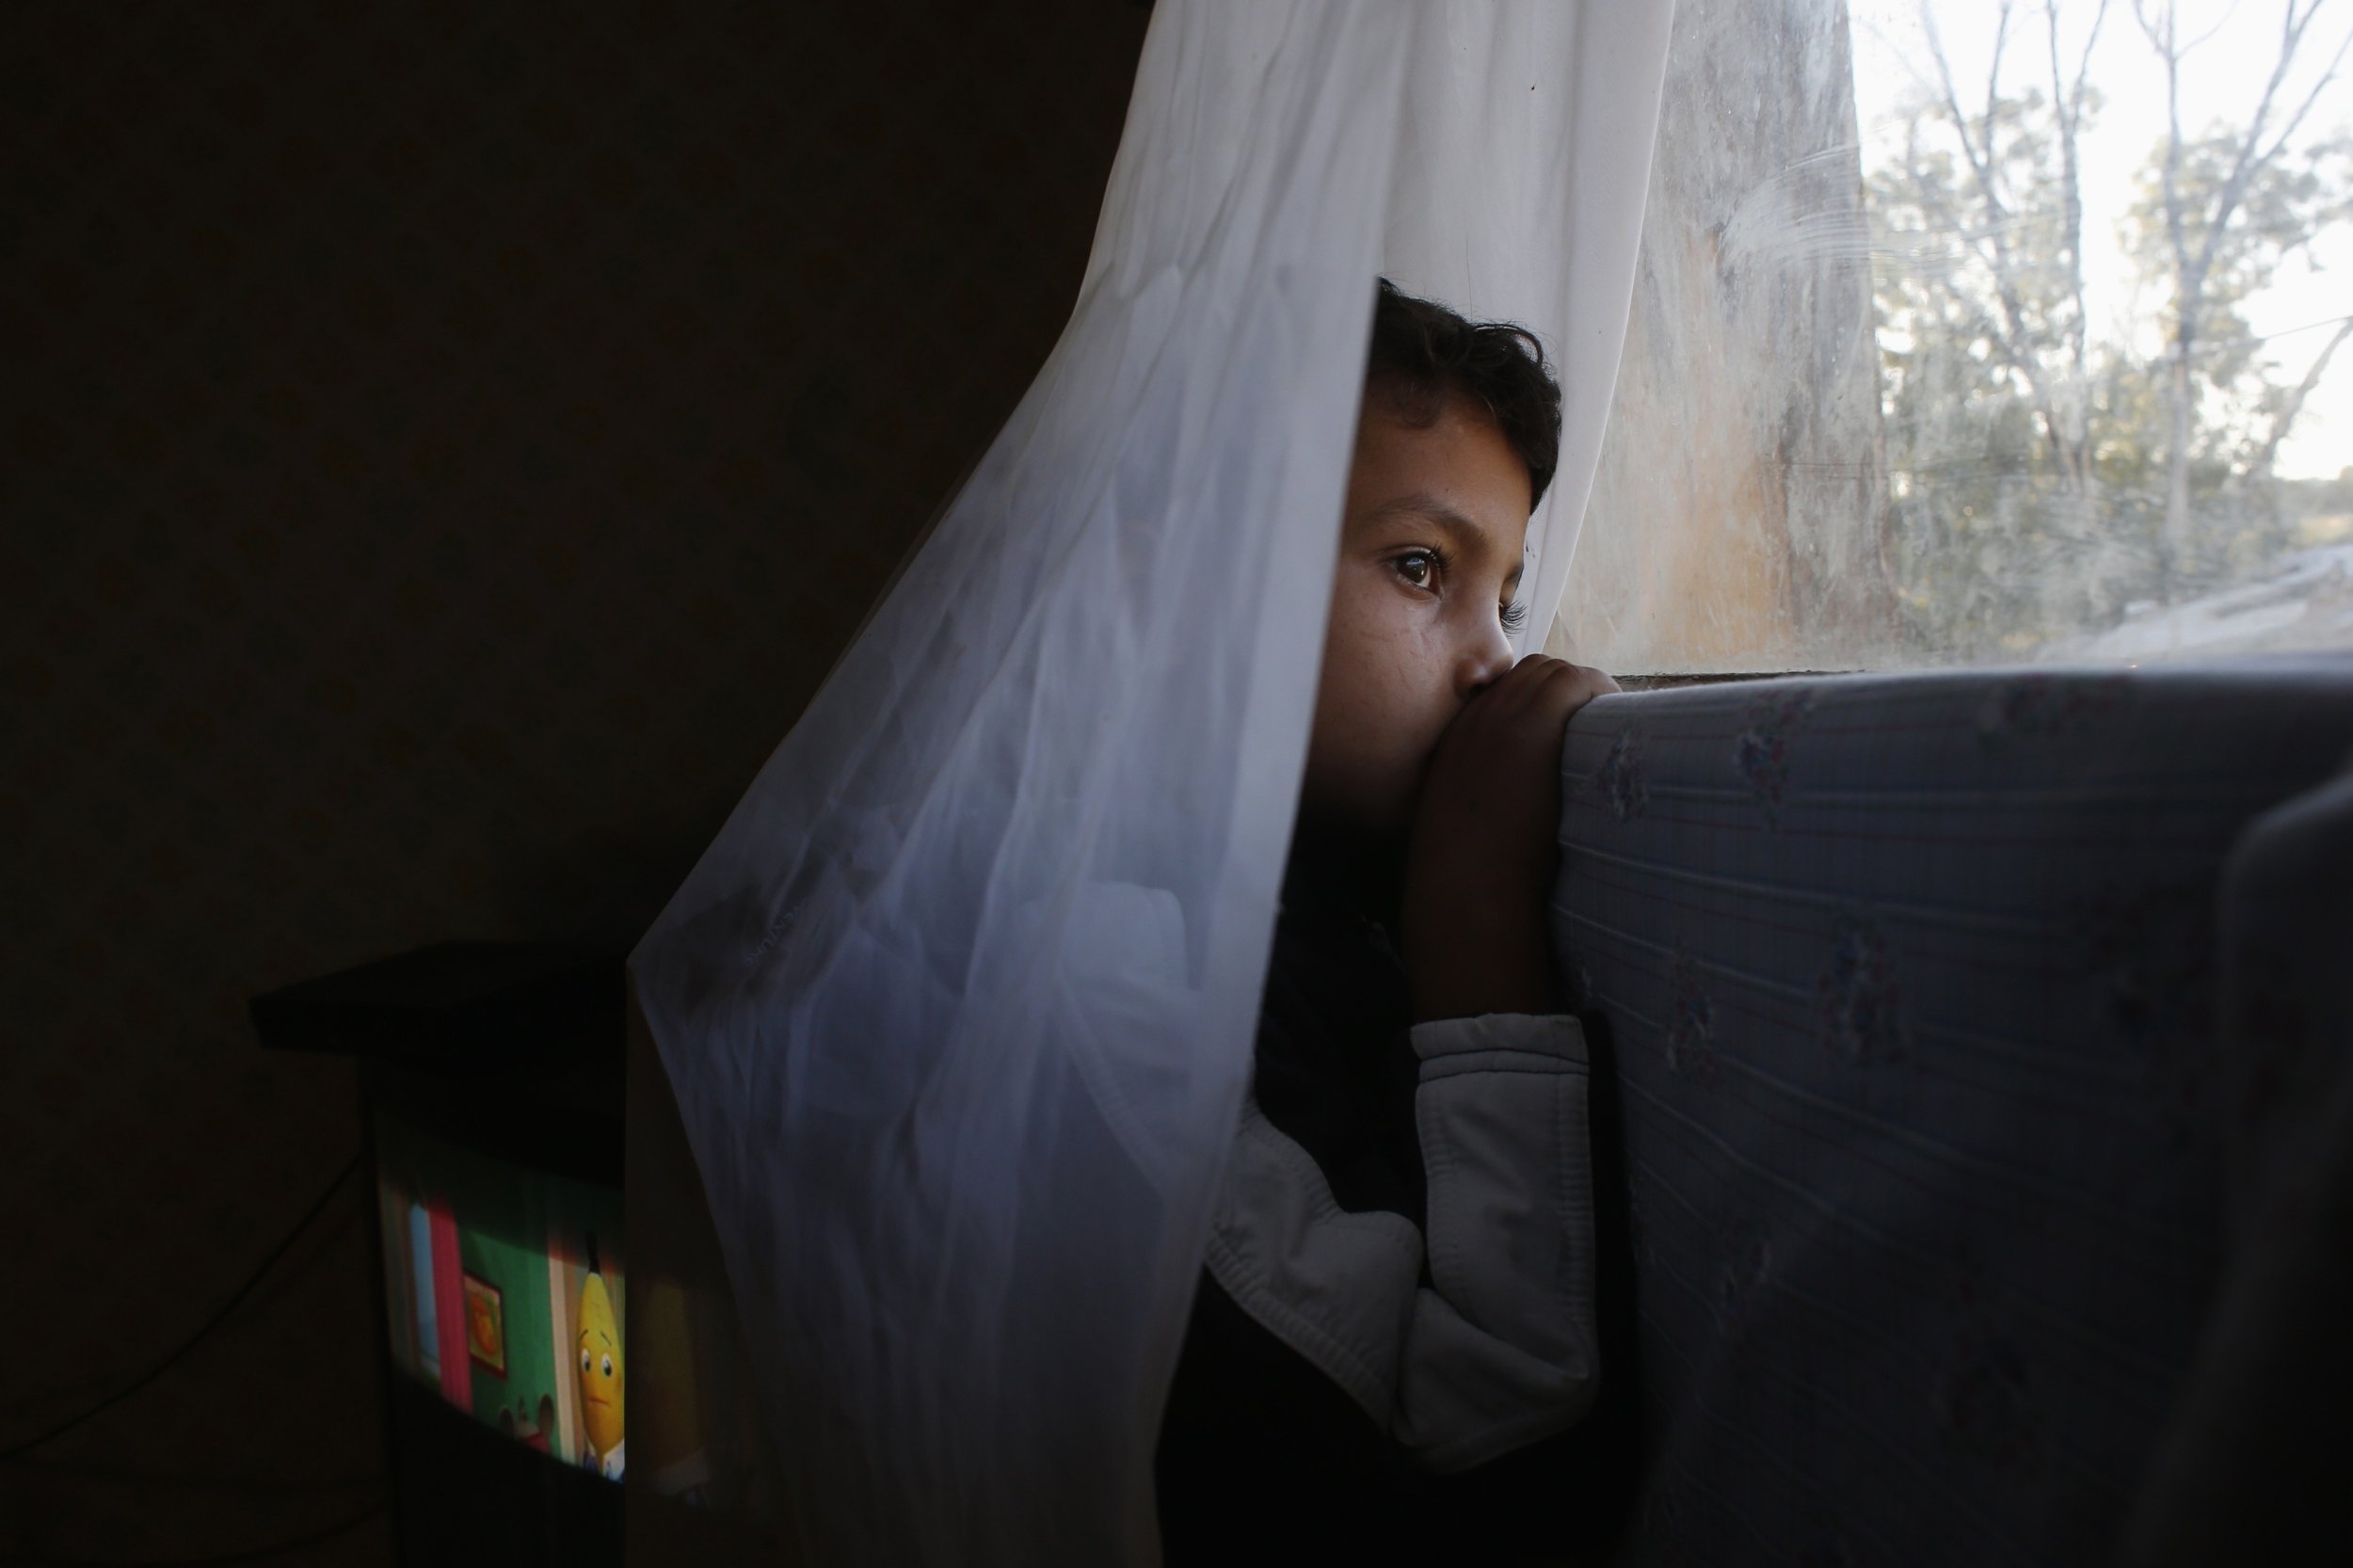 Six-year-old Abel watches from his window as an excavator demolishes a neighbors shack in Madrids El Gallinero slum.